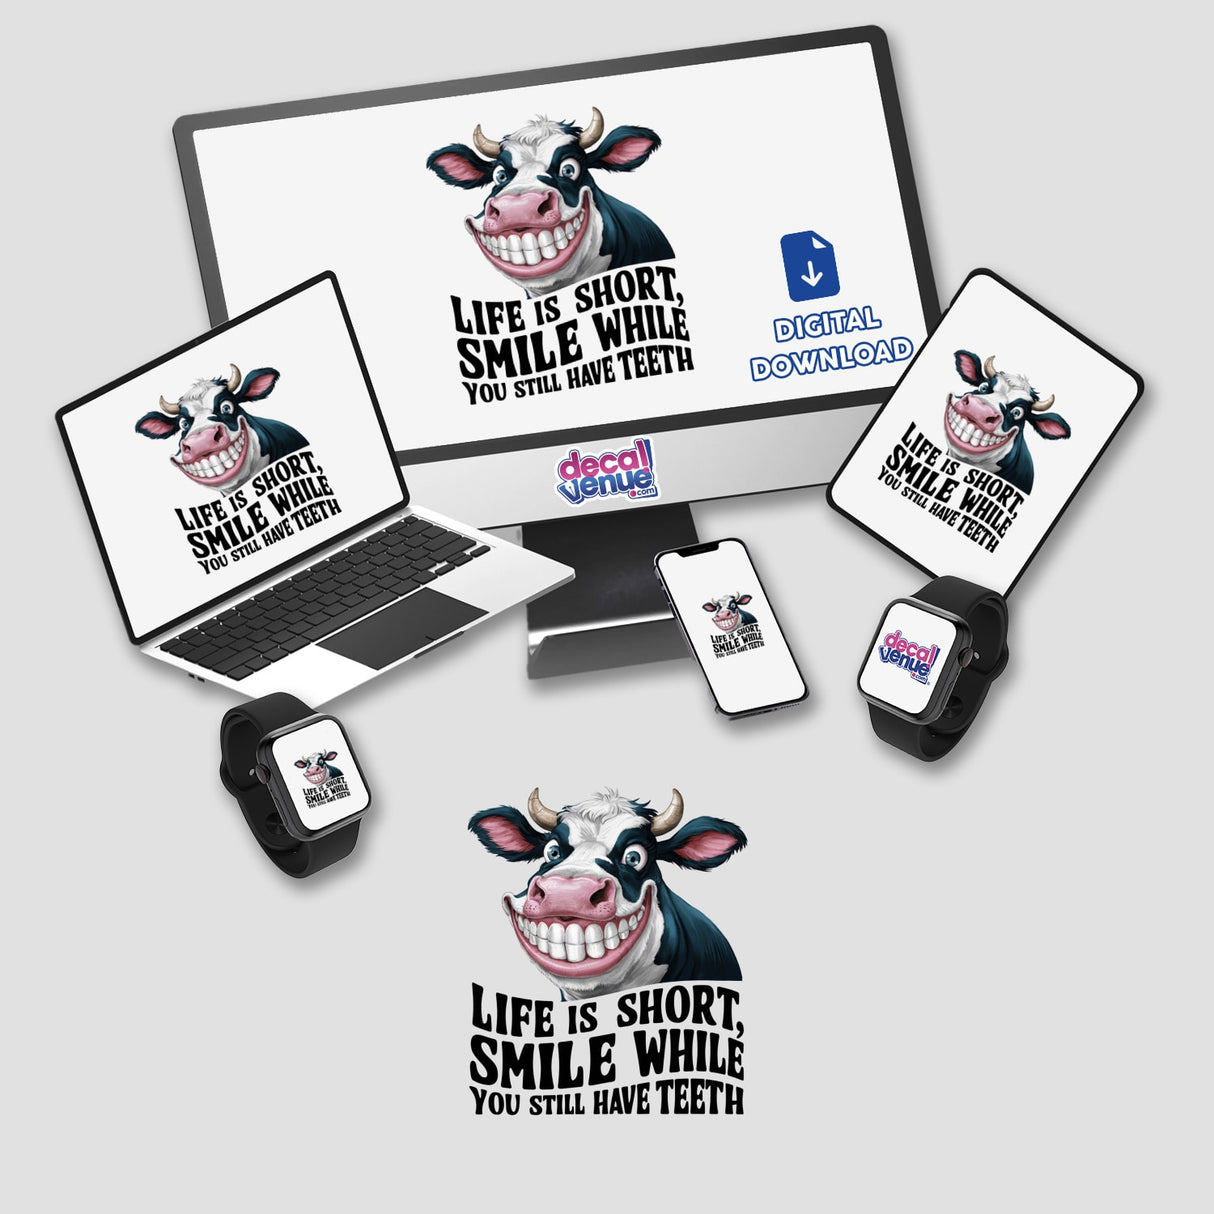 Cartoon cow with a wide grin and text "Life is short. Smile while you still have teeth" shown on various digital devices and merchandise.